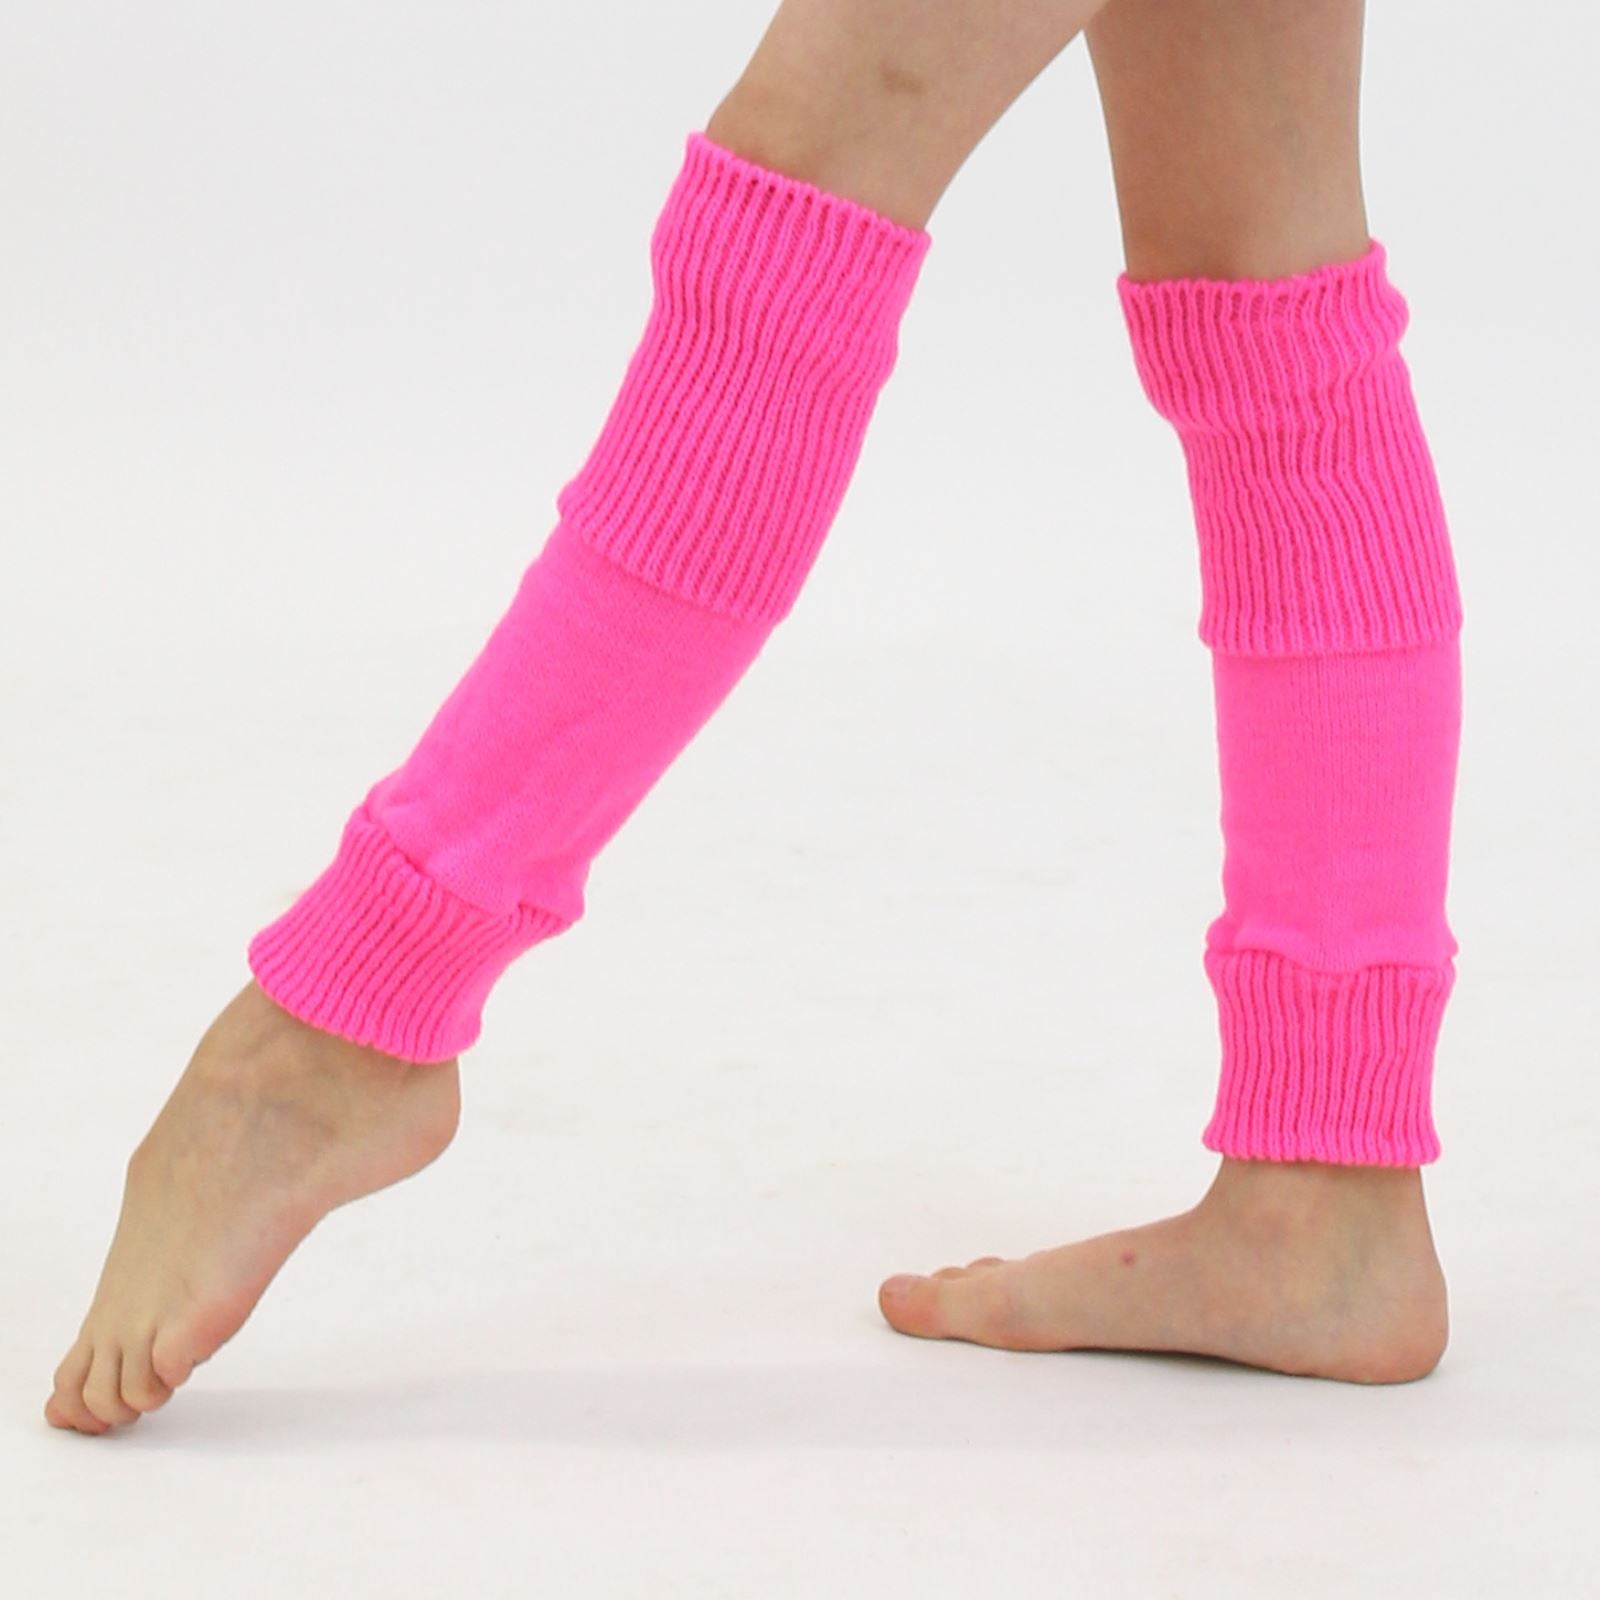 15" ACRYLIC ANKLEWARMERS Knitwear Dancers World Fluorescent Pink 